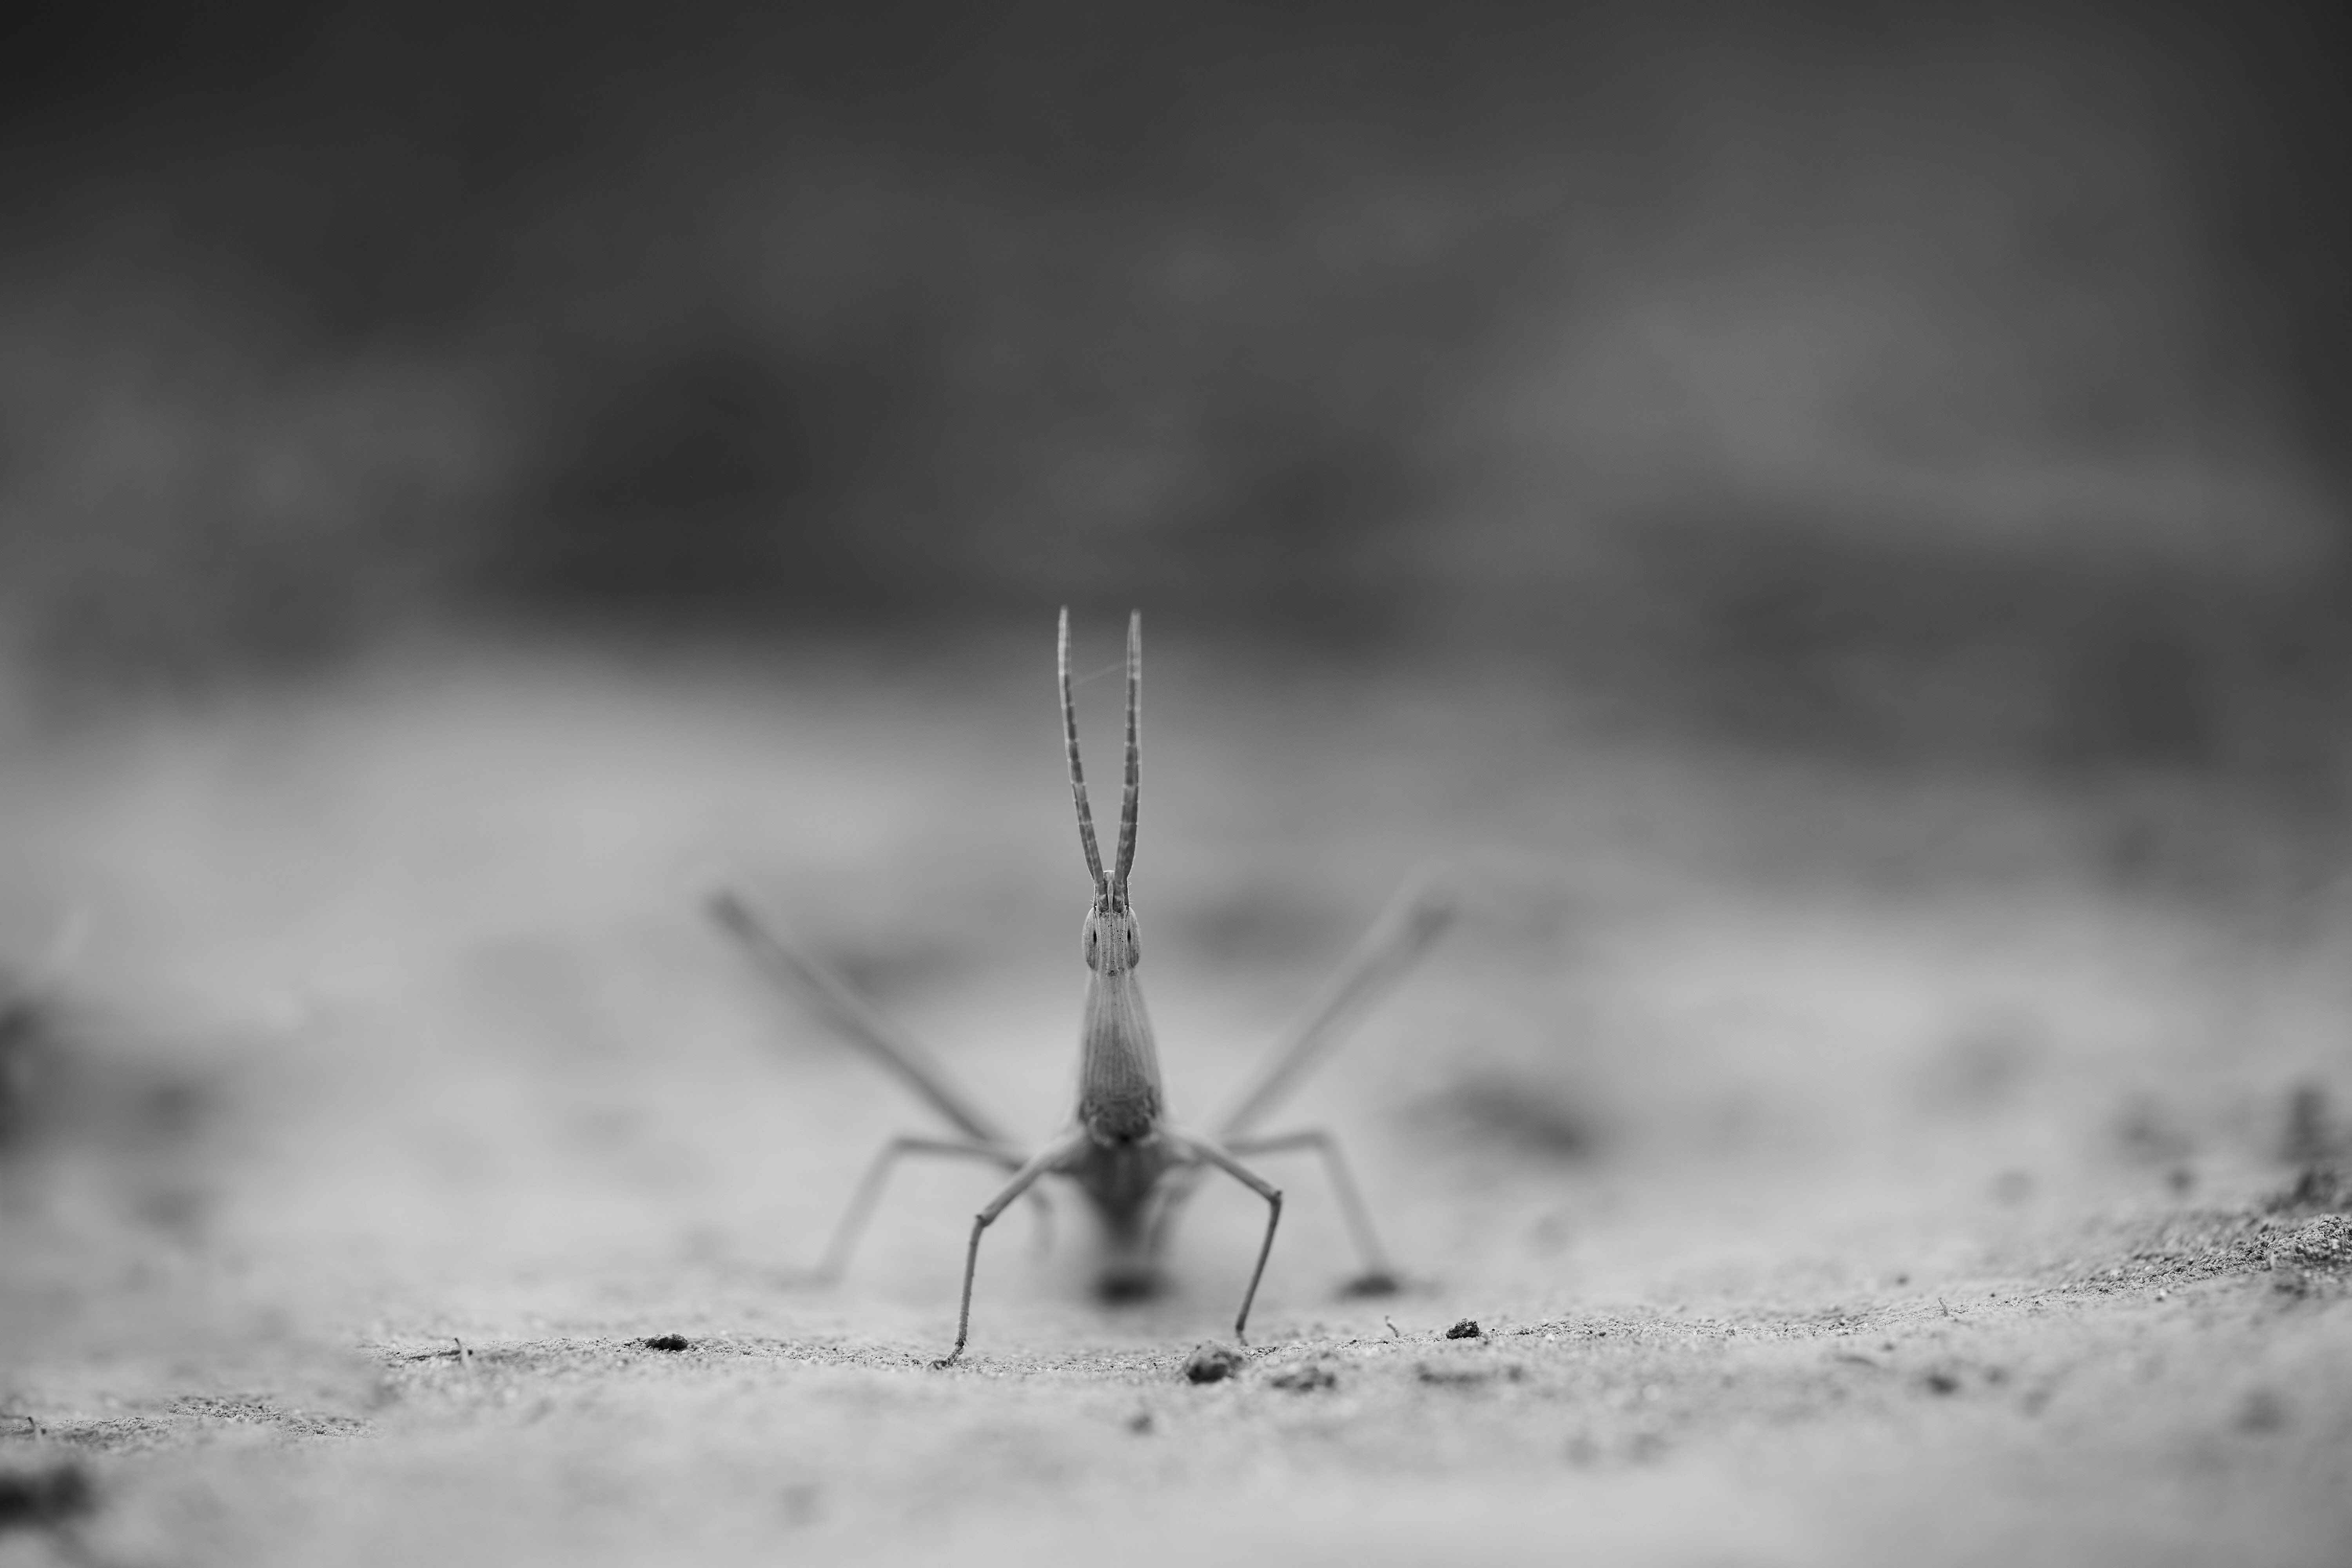 grayscale photo of a insect on a white surface